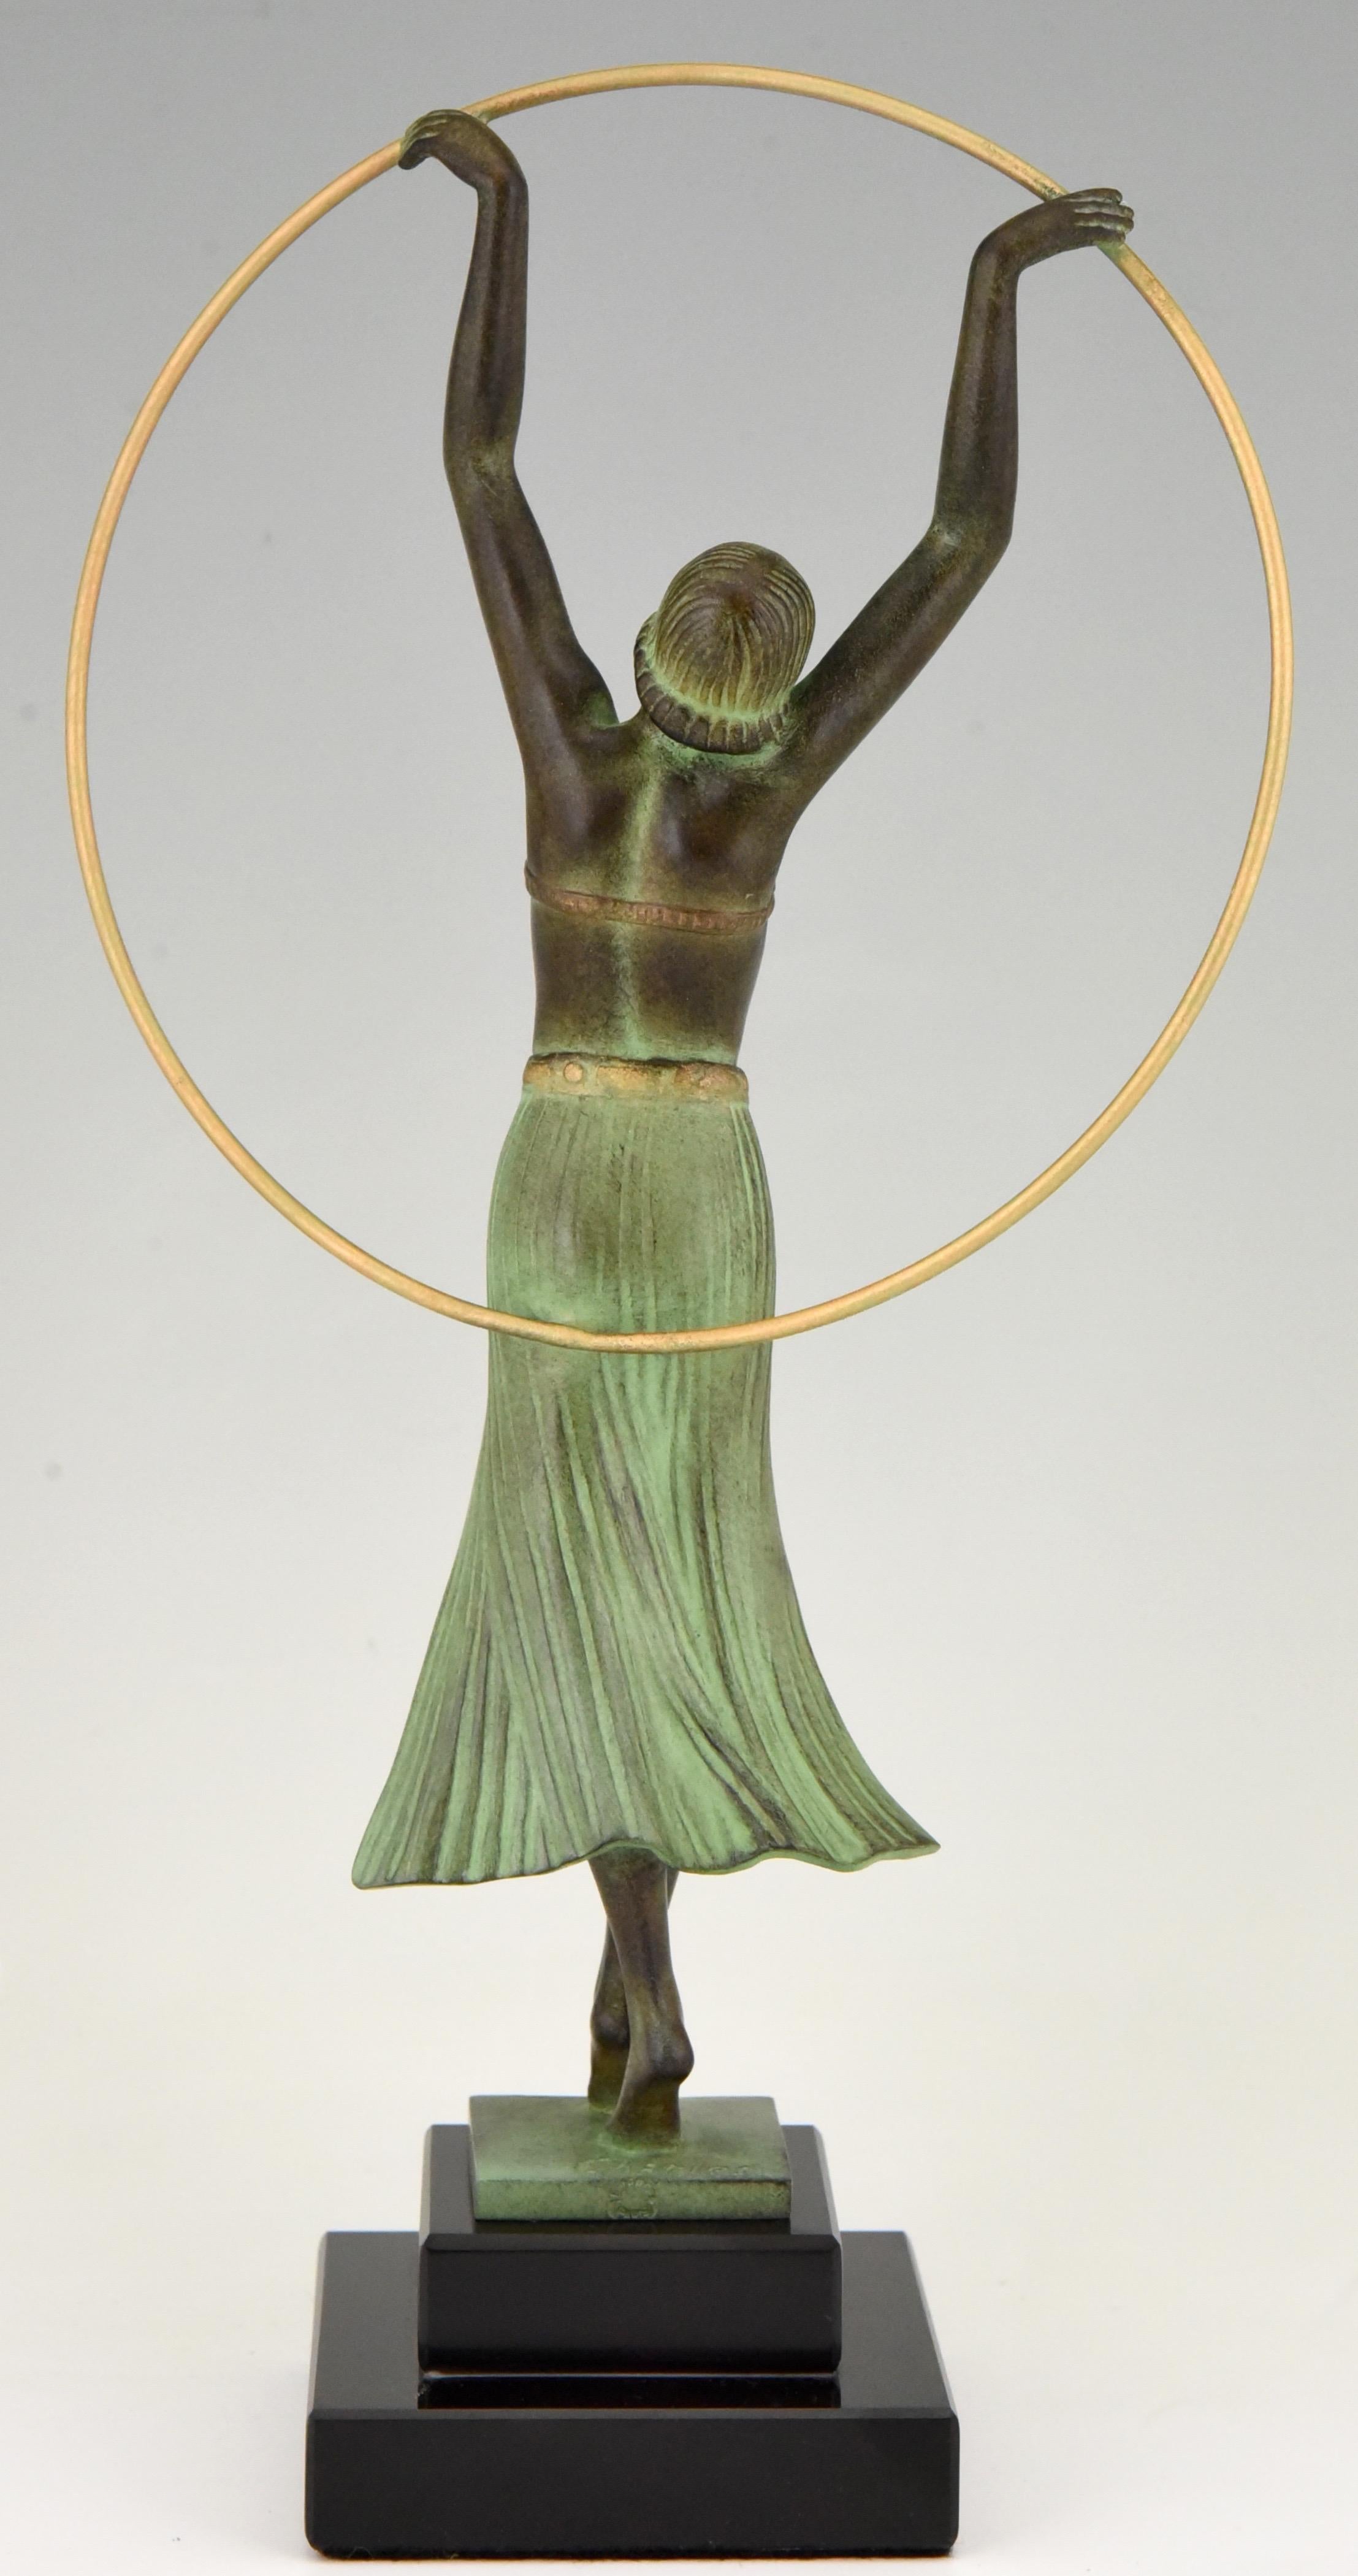 Patinated Art Deco style Sculpture BAYADERE Hoop Dancer by Charles for Max Le Verrier For Sale